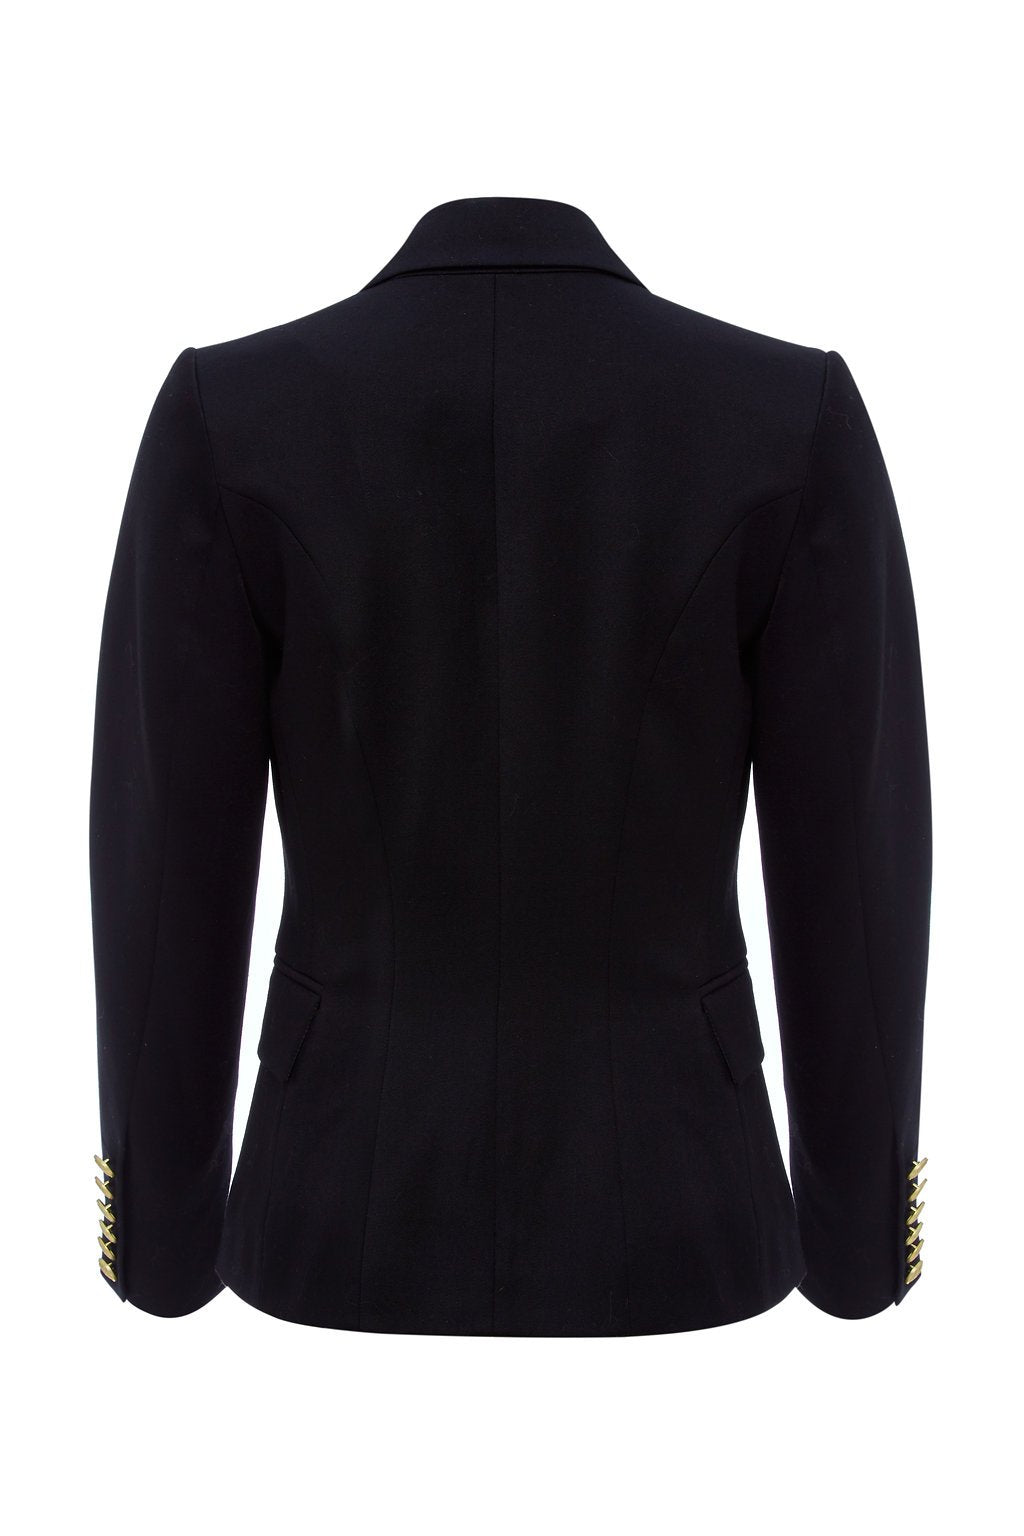 back of British made double breasted blazer that fastens with a single button hole to create a more form fitting silhouette with two pockets and gold button detailing this blazer is made from black barathea